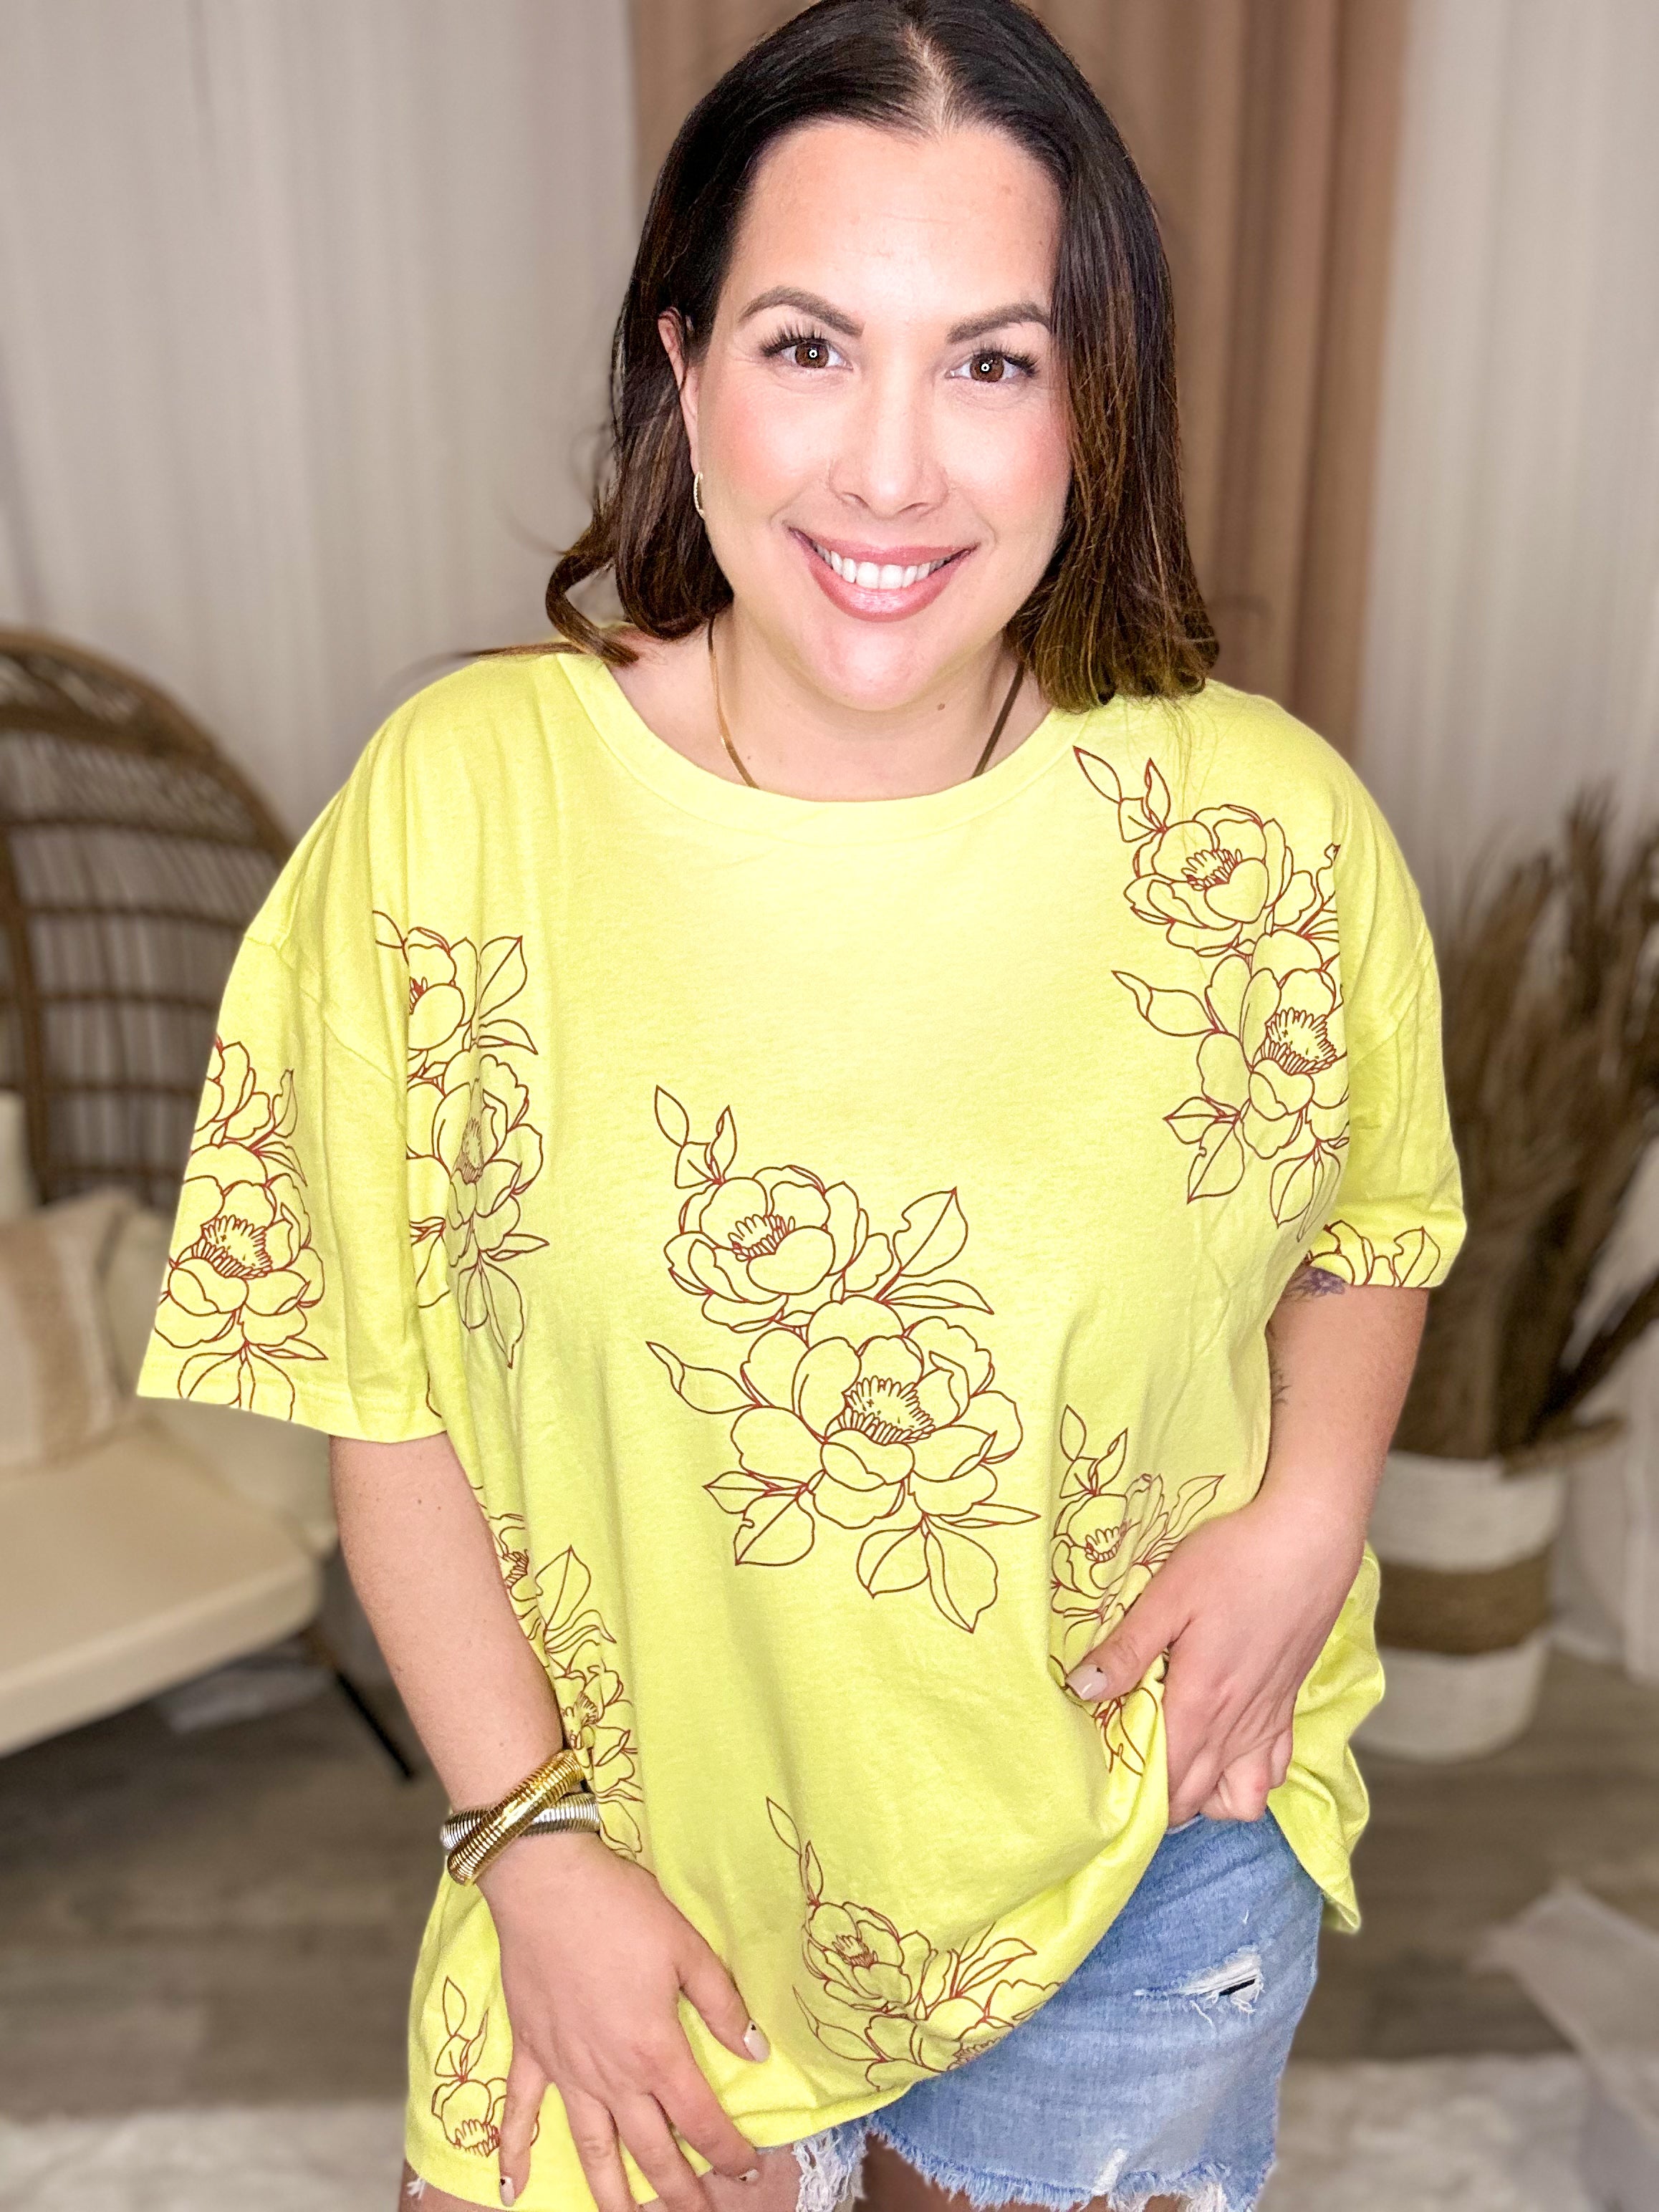 Wildflower Top-110 Short Sleeve Top-Easel-Heathered Boho Boutique, Women's Fashion and Accessories in Palmetto, FL